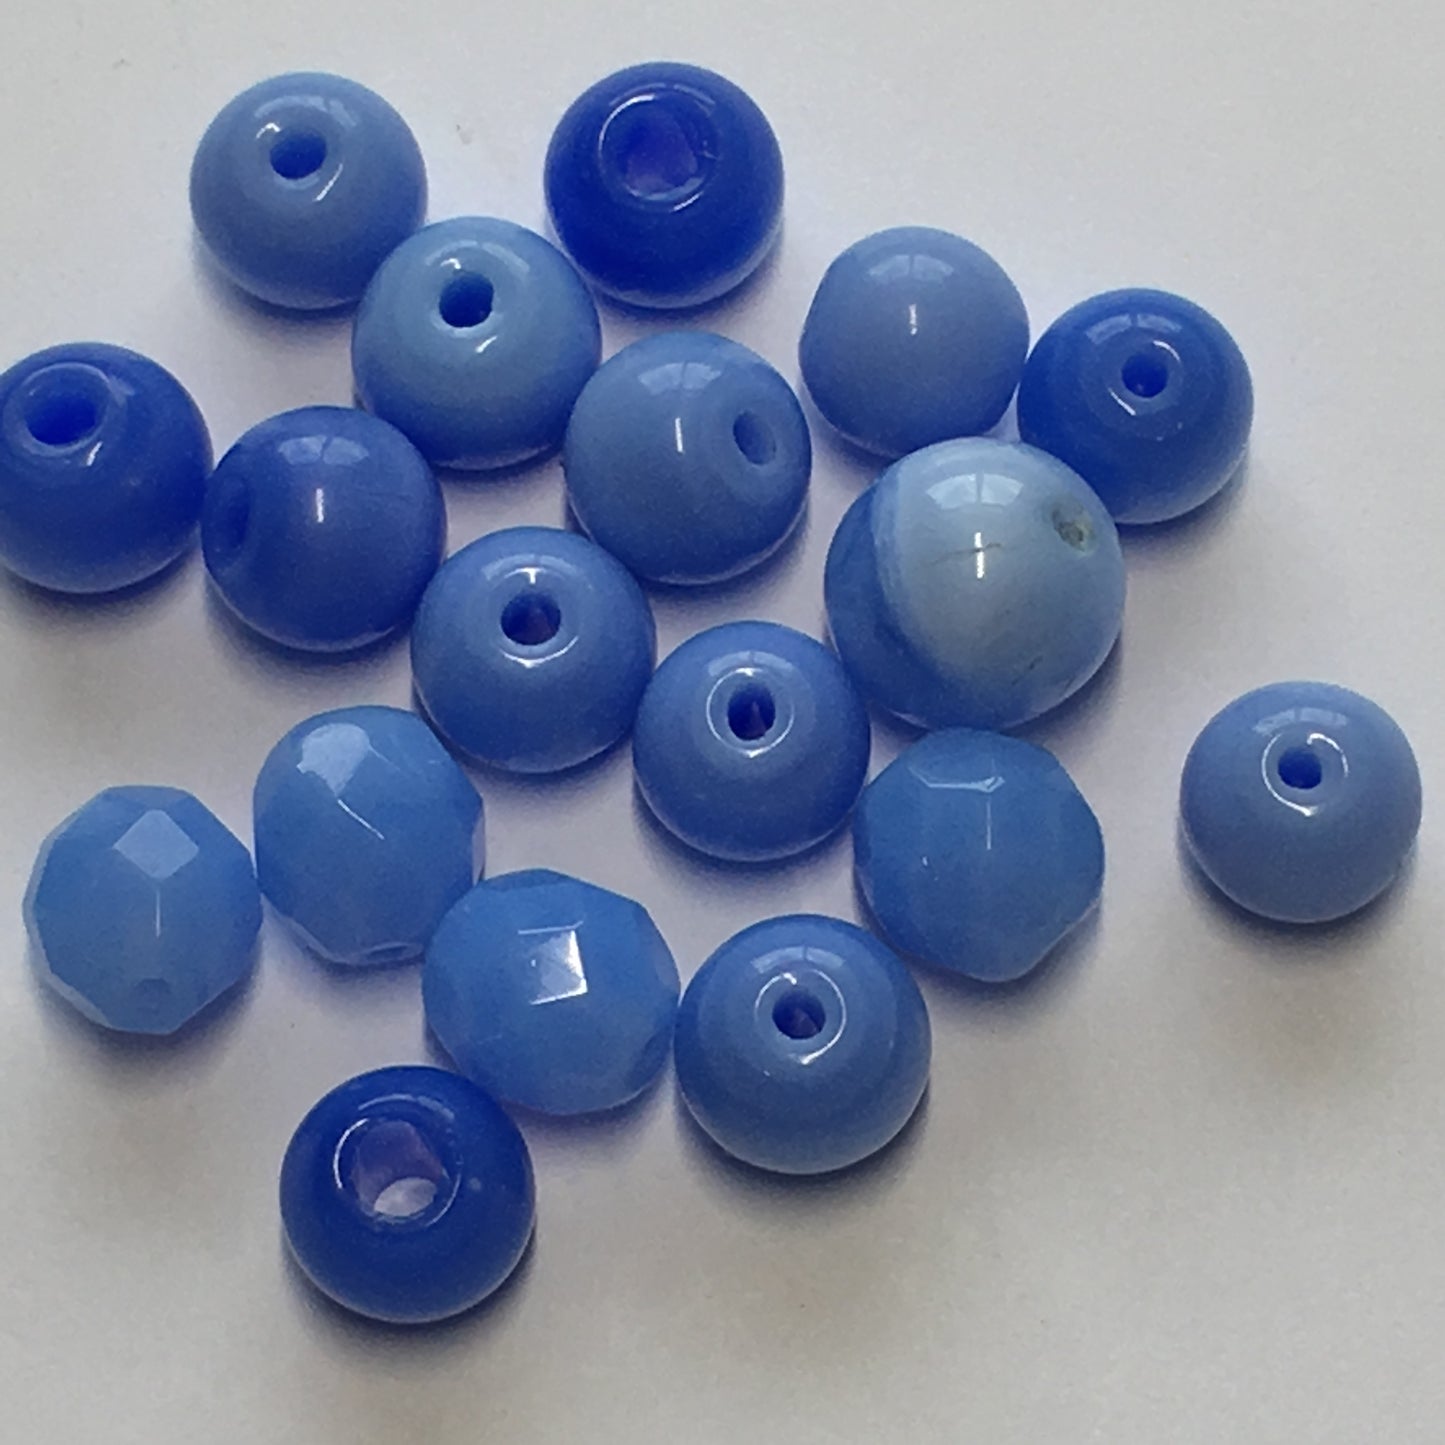 Shades of Blue Smooth and Faceted Round Glass Beads, 8 & 10 mm, 18 Beads